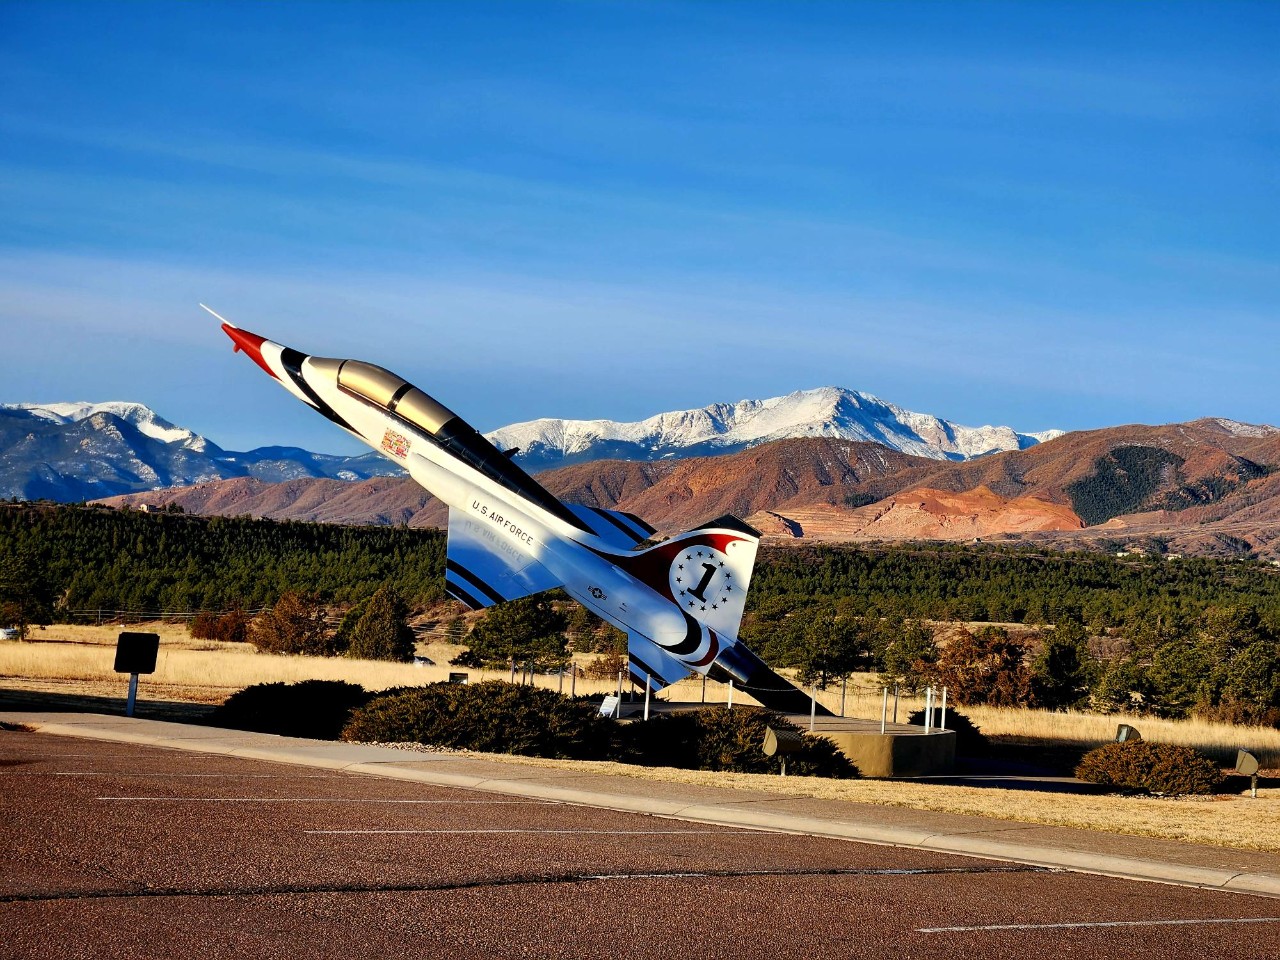 An Air Force Thunderbird aircraft displayed at the entrance of the Air Force Academy.